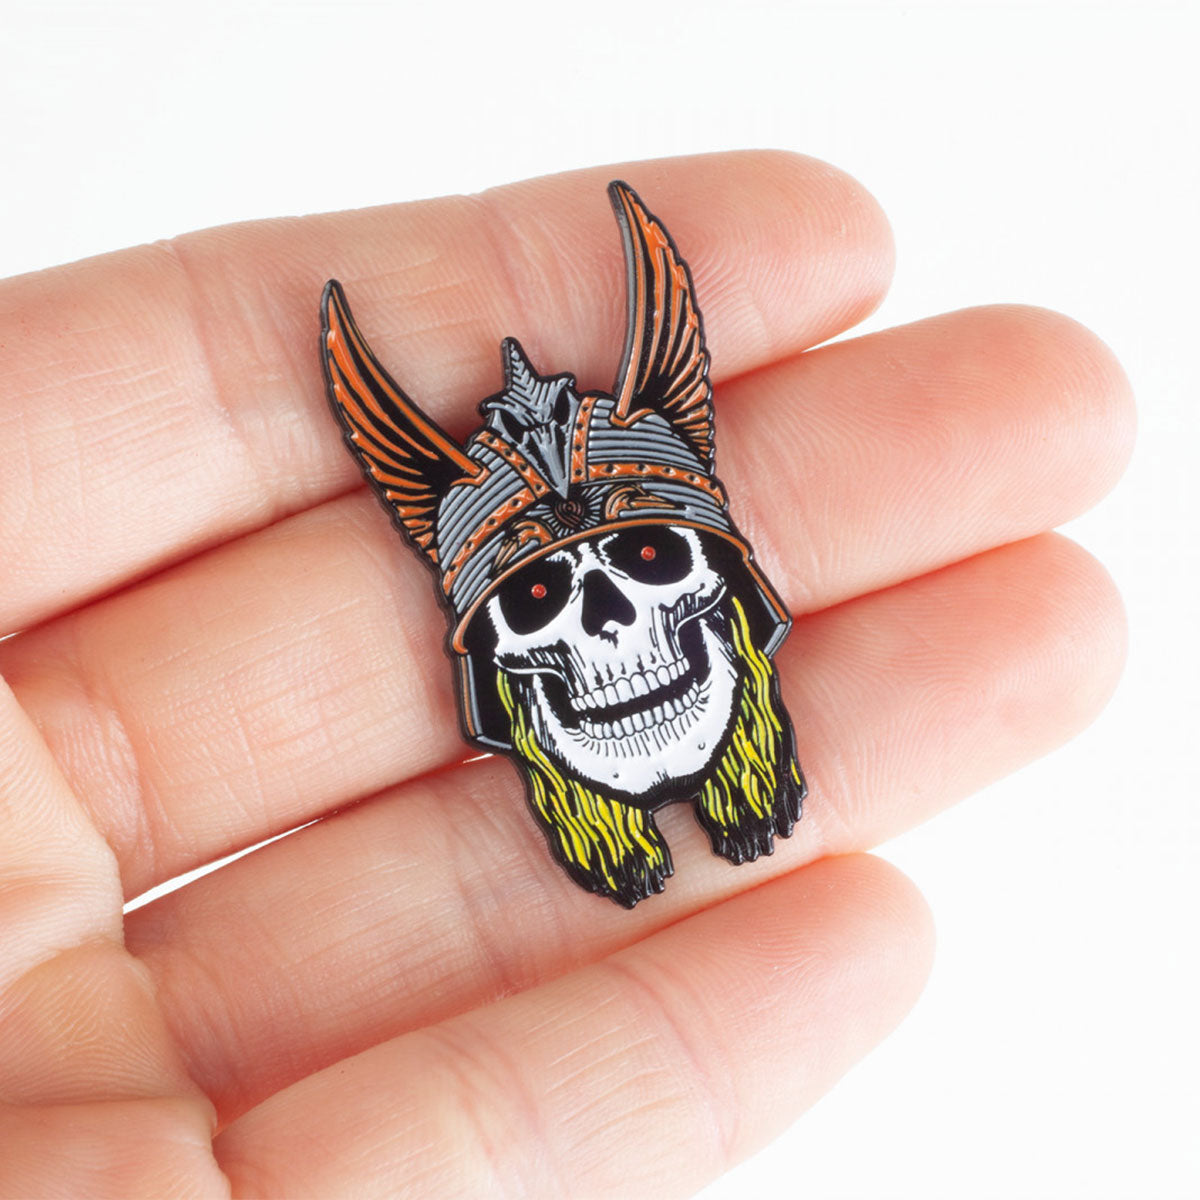 Powell Peralta Lapel Andy Anderson Pin image 2